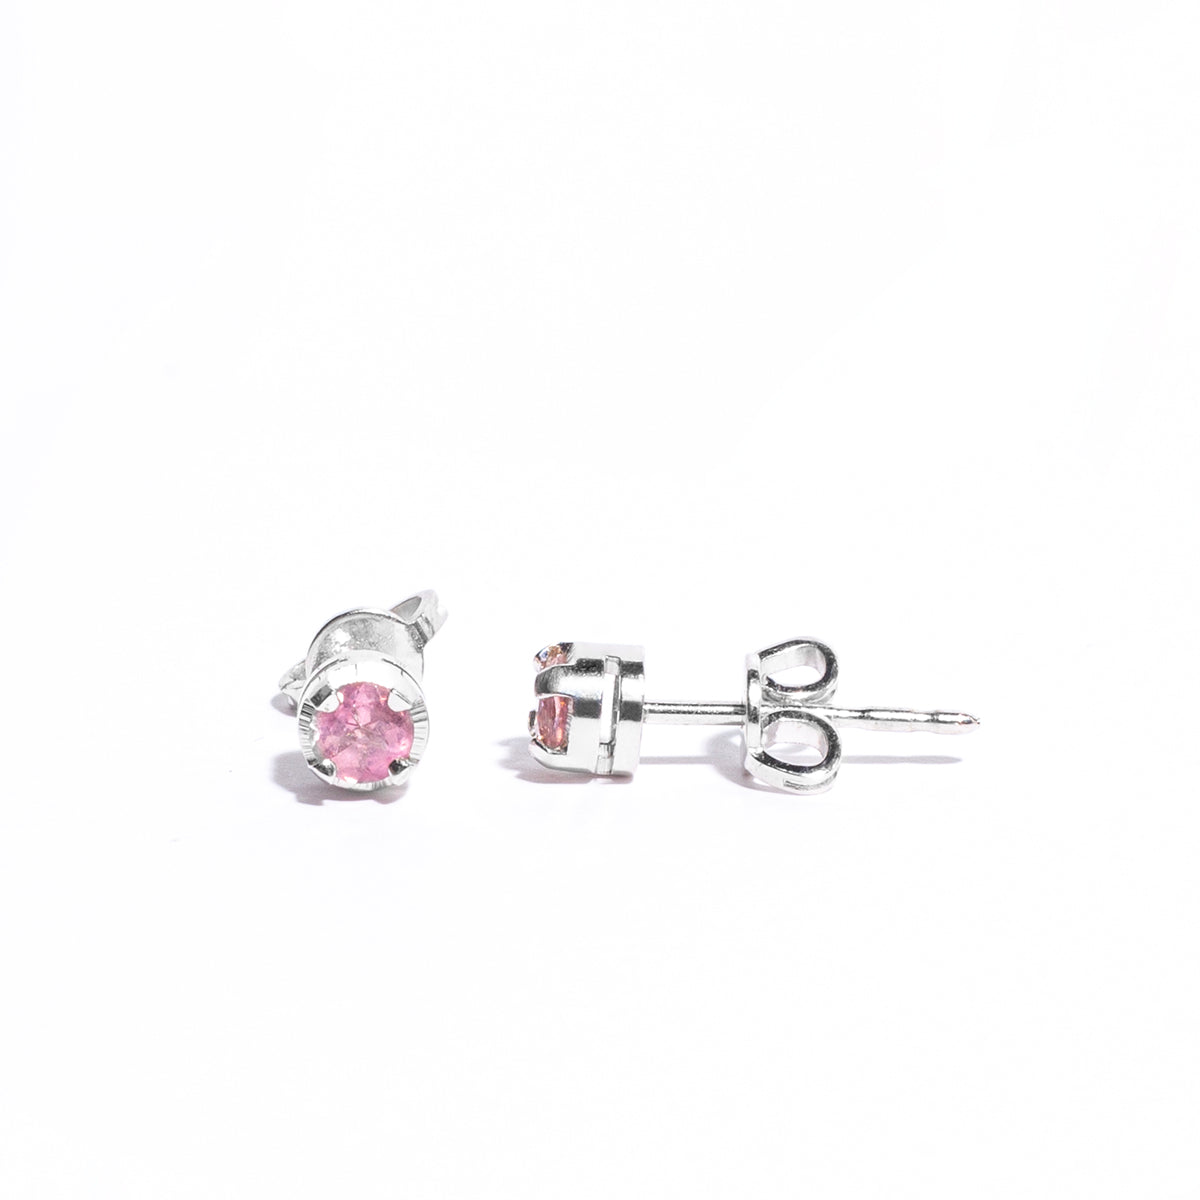 White gold with Pink Tourmaline Earrings 